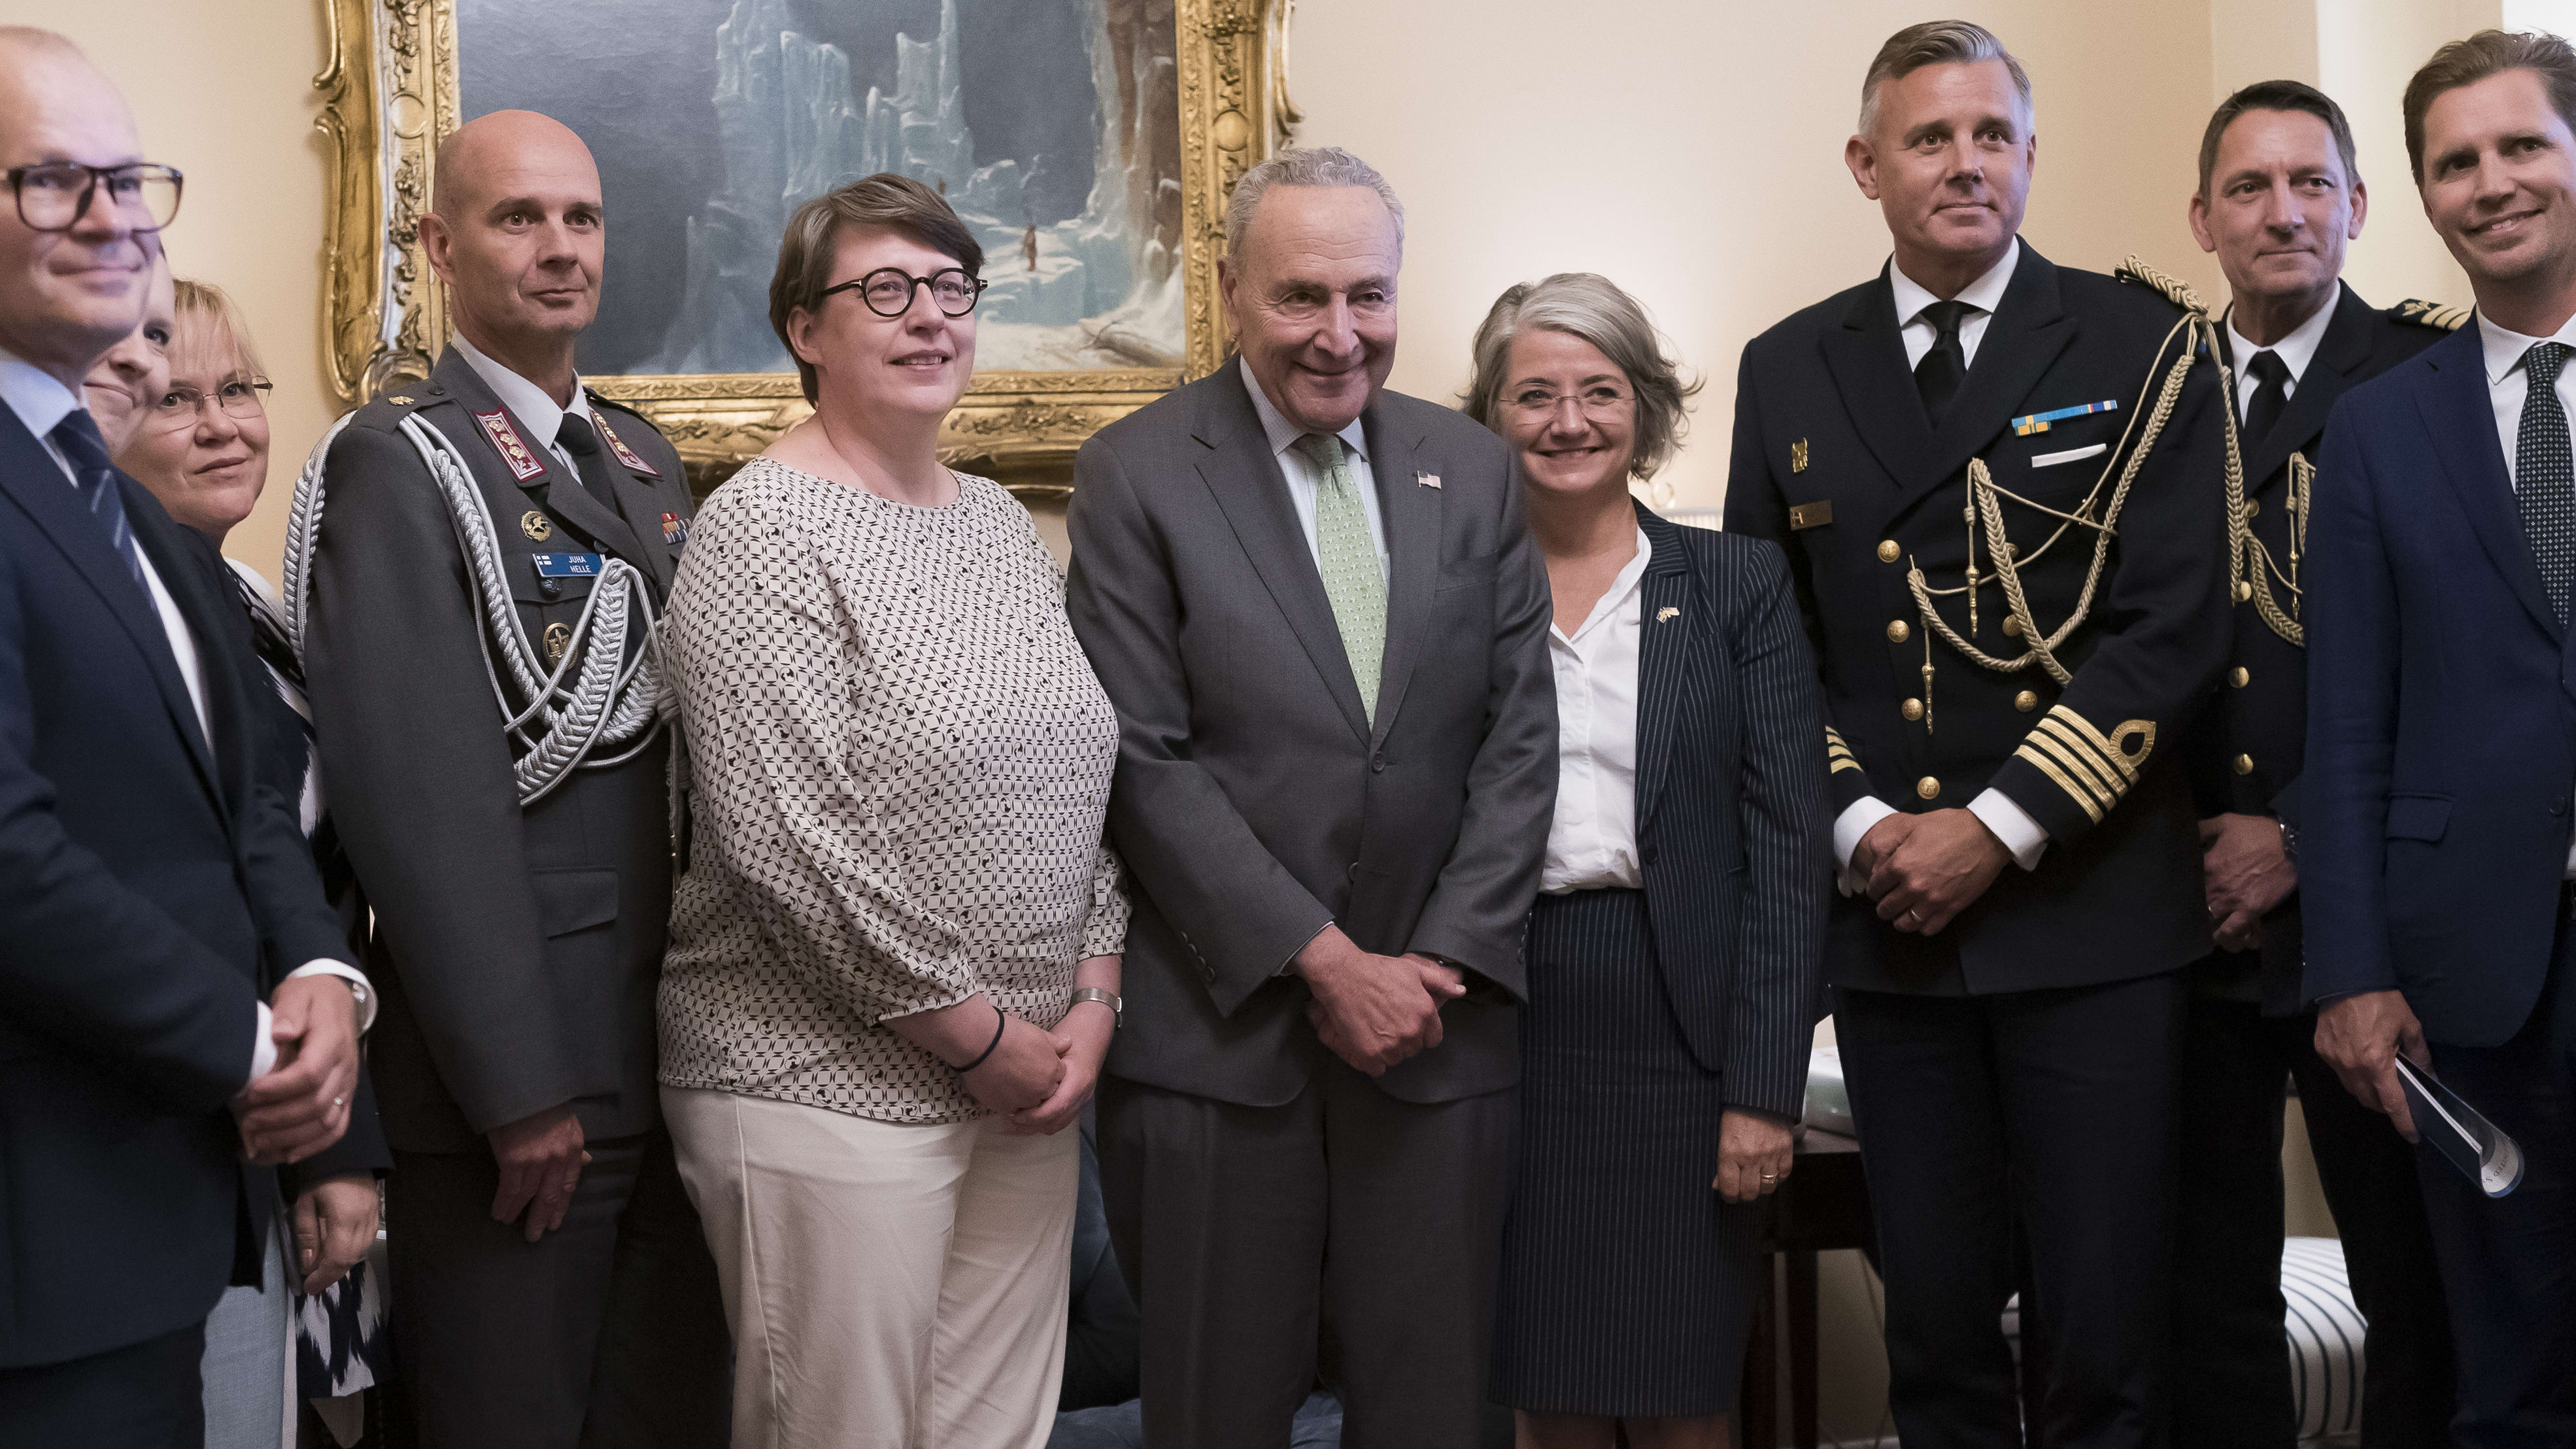 Senate Majority Leader Chuck Schumer, center, is flanked by Paivi Nevala, minister counselor of the Finnish Embassy, left, and Karin Olofsdotter, Sweden&#039;s ambassador to the U.S.